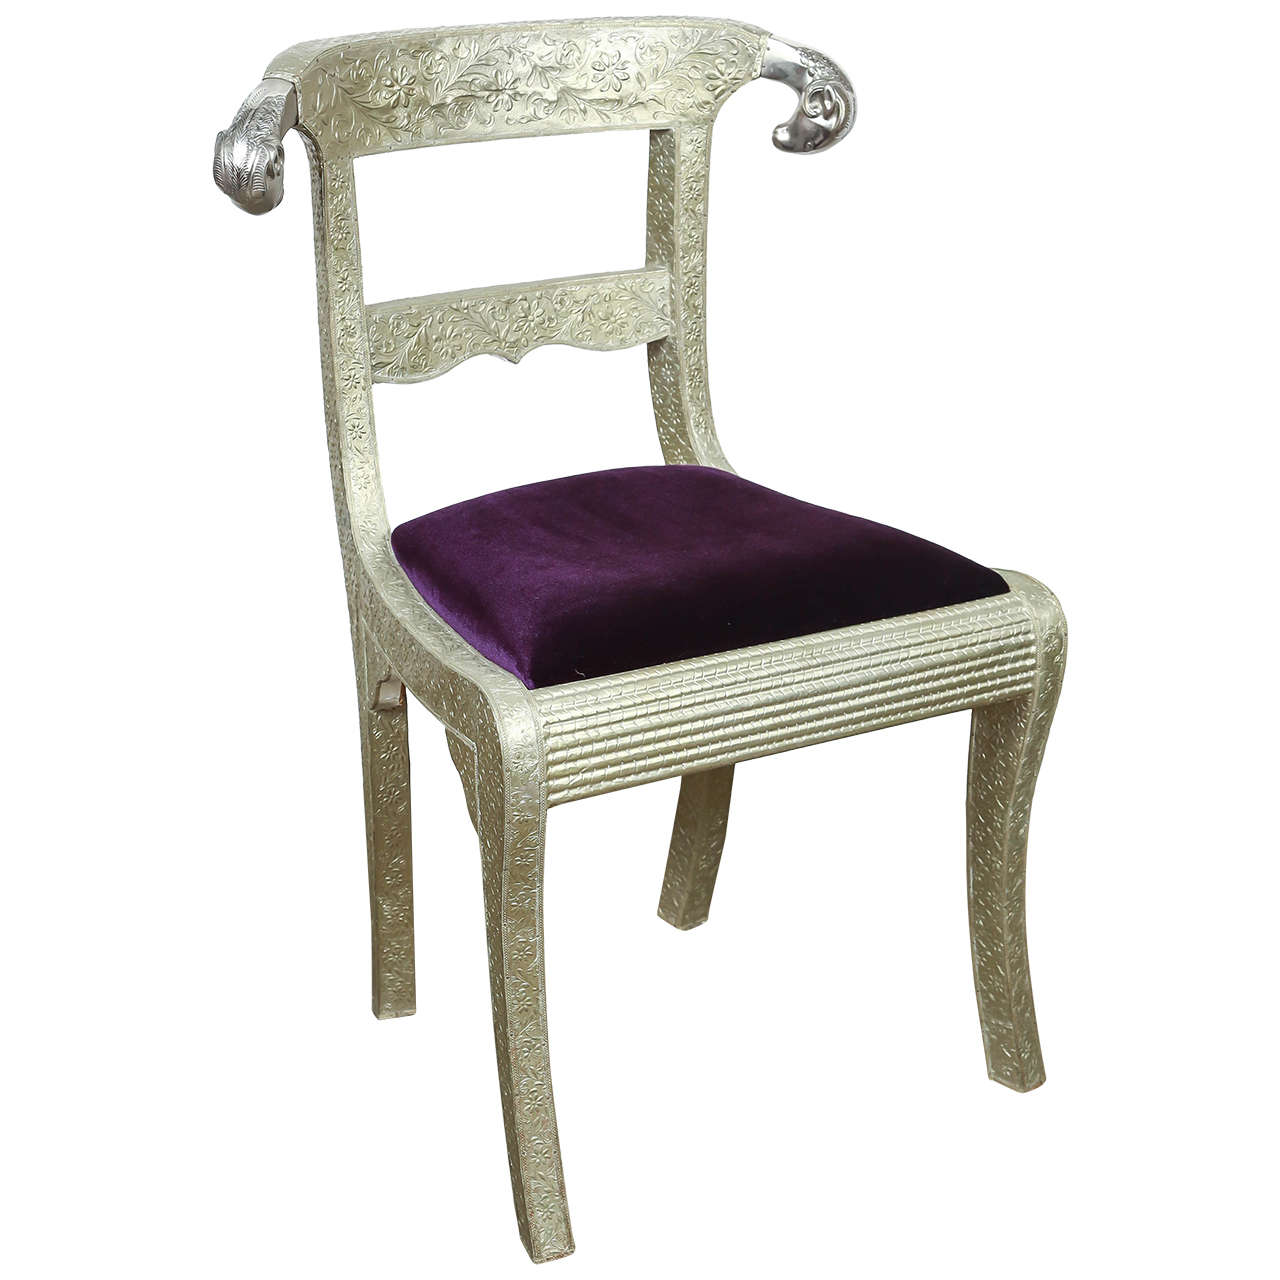 Anglo-Indian Silvered Wrapped Clad Side Chair